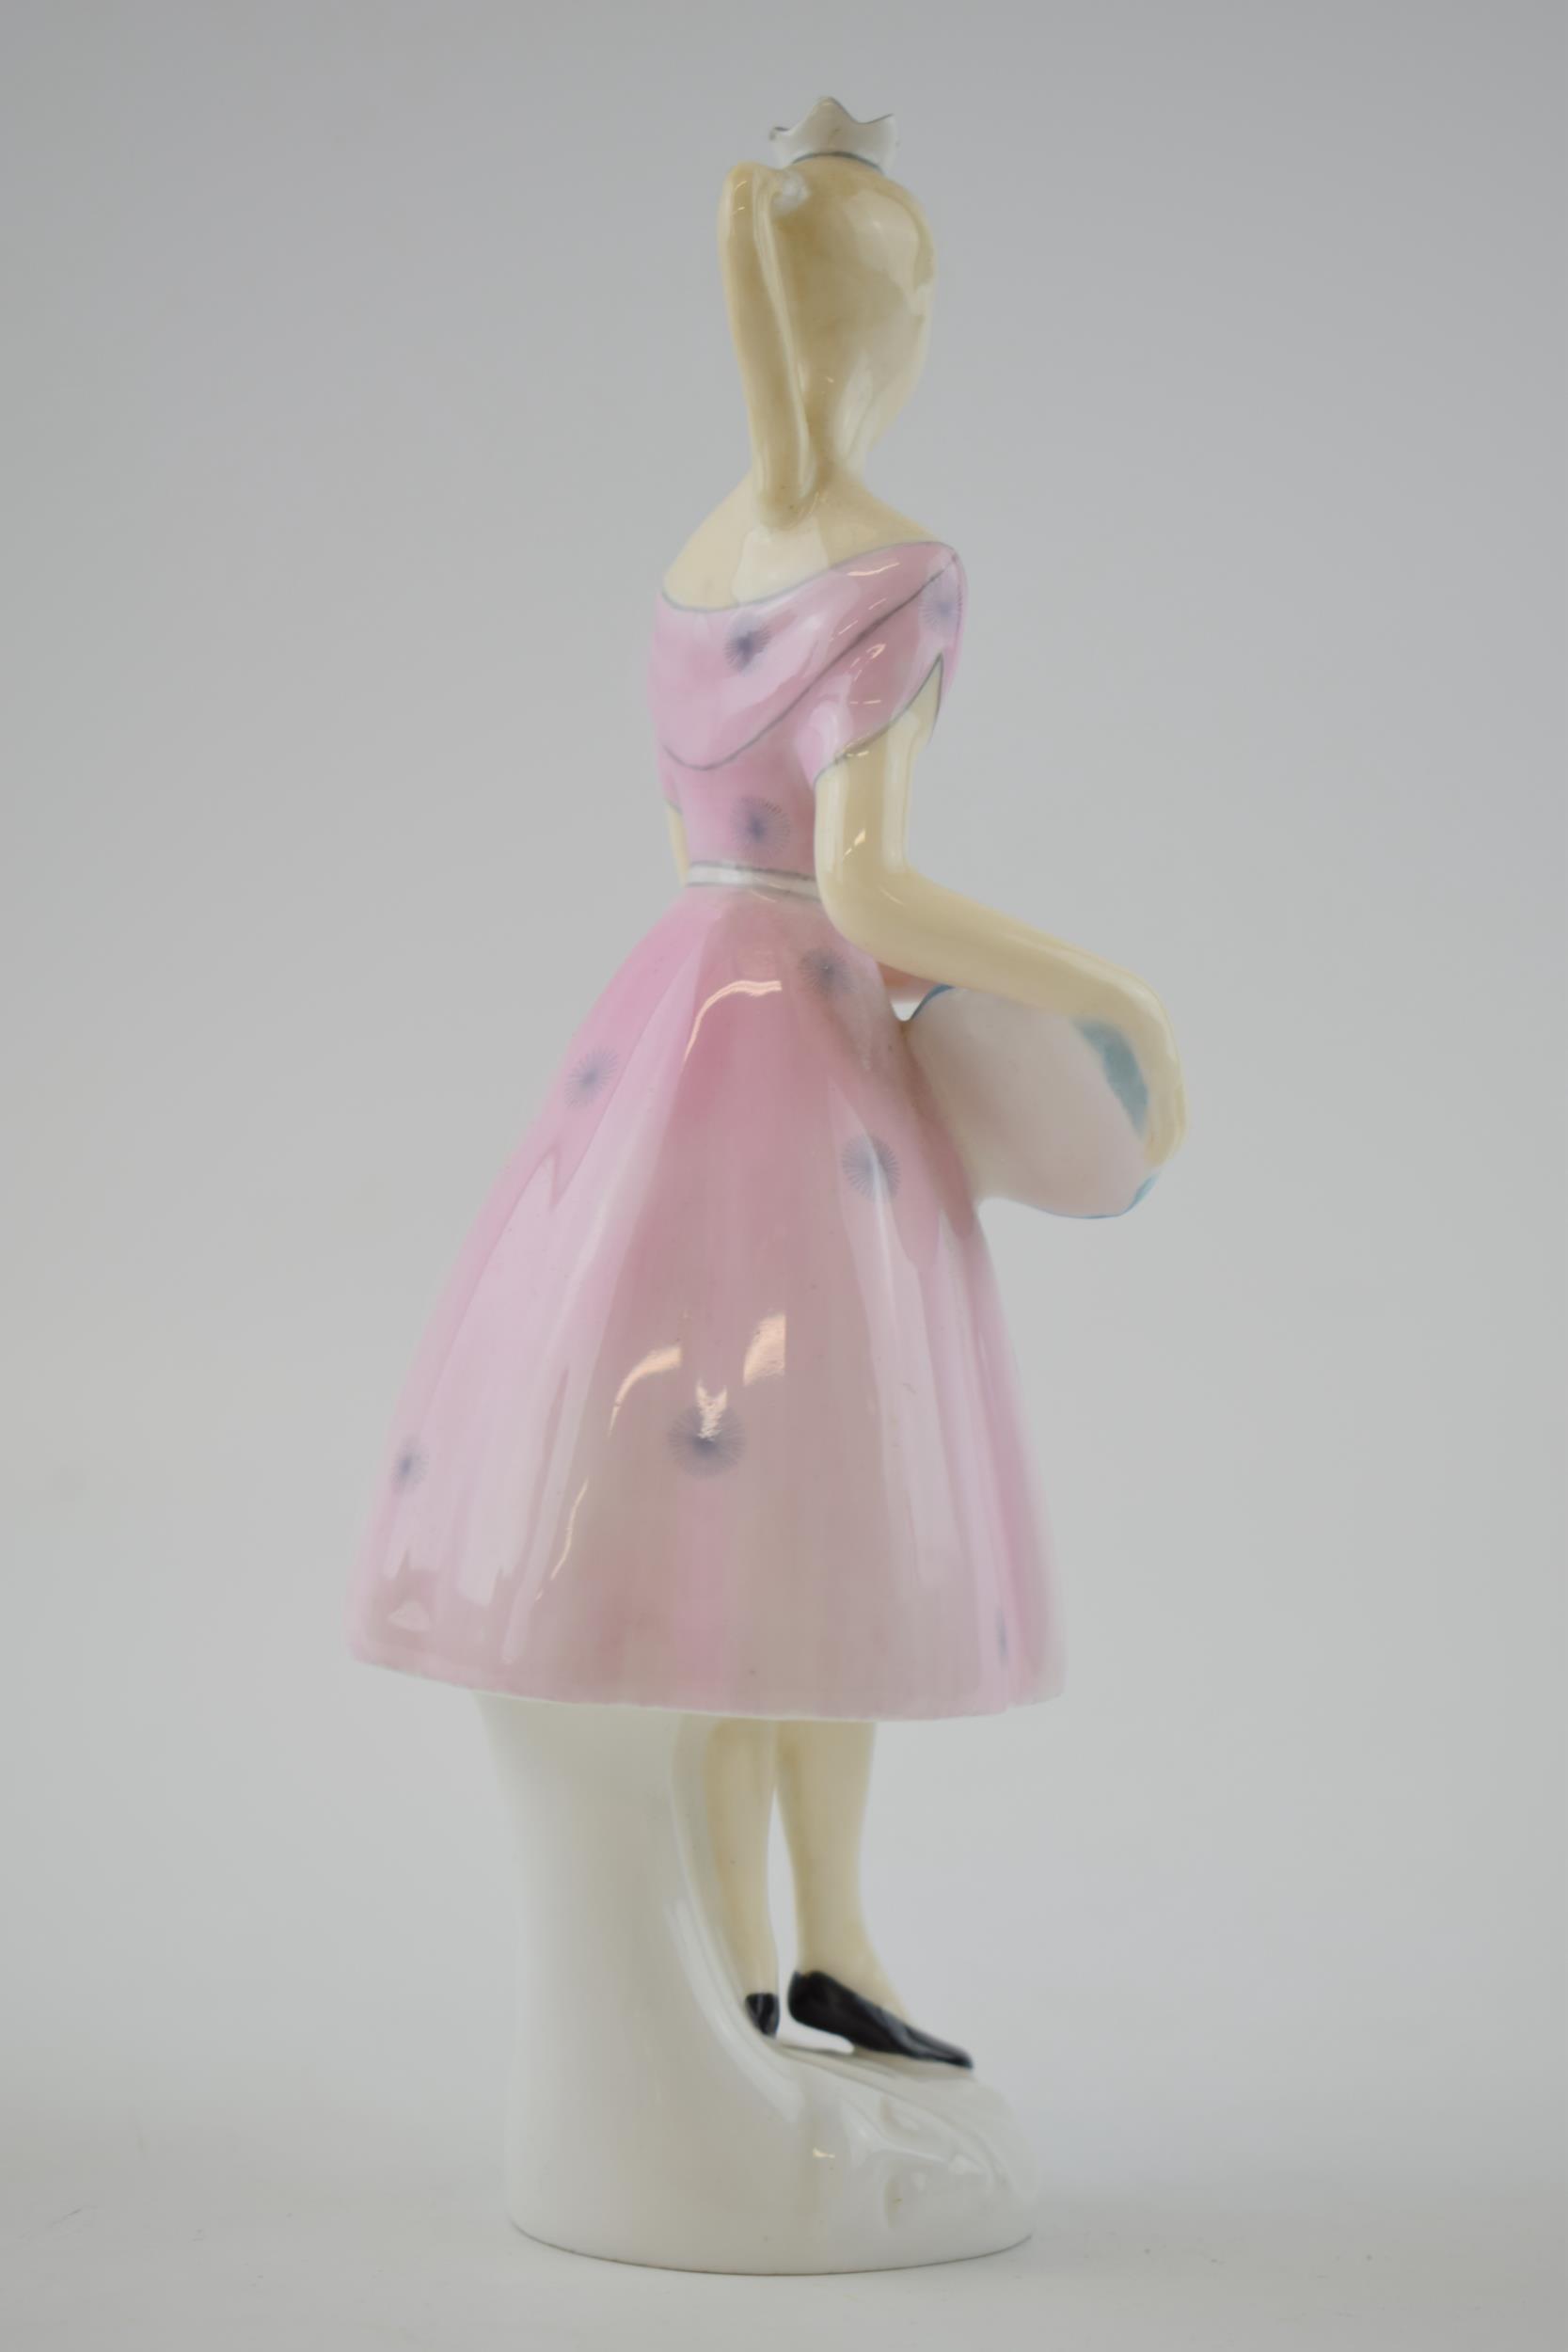 Royal Doulton figurine Columbine HN2185. In good condition with no obvious damage or restoration. - Image 2 of 3